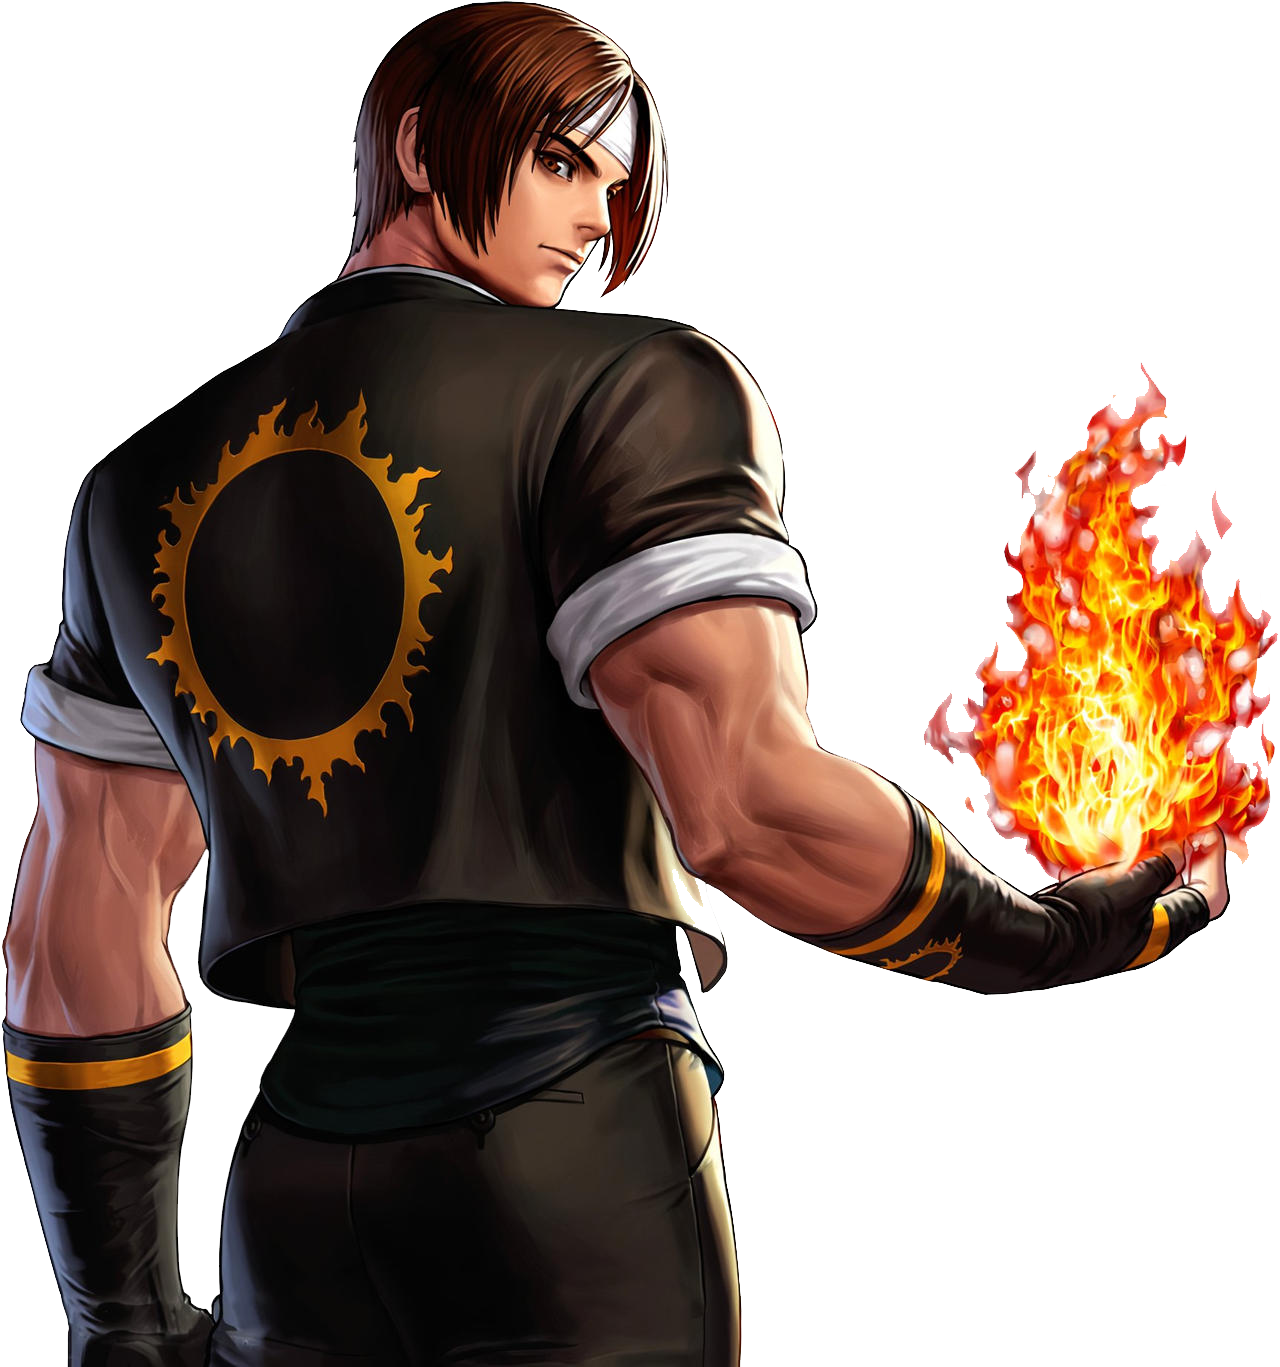 The King of Fighters ALLSTAR adds two new Special Signature